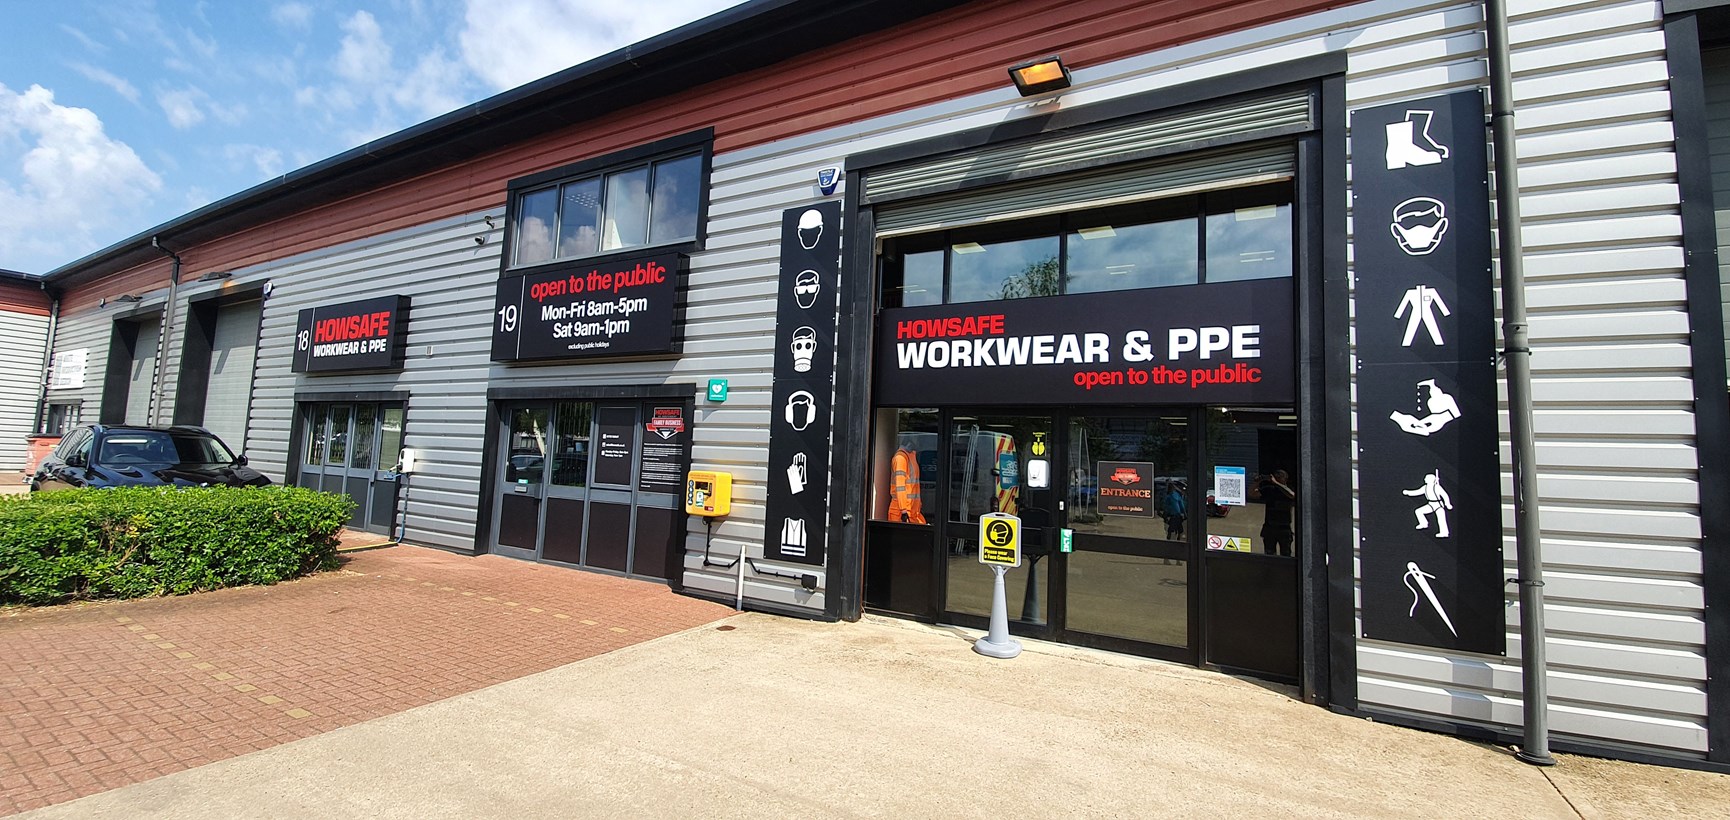 Illuminated tray signs for Howsafe Workwear & PPE shop